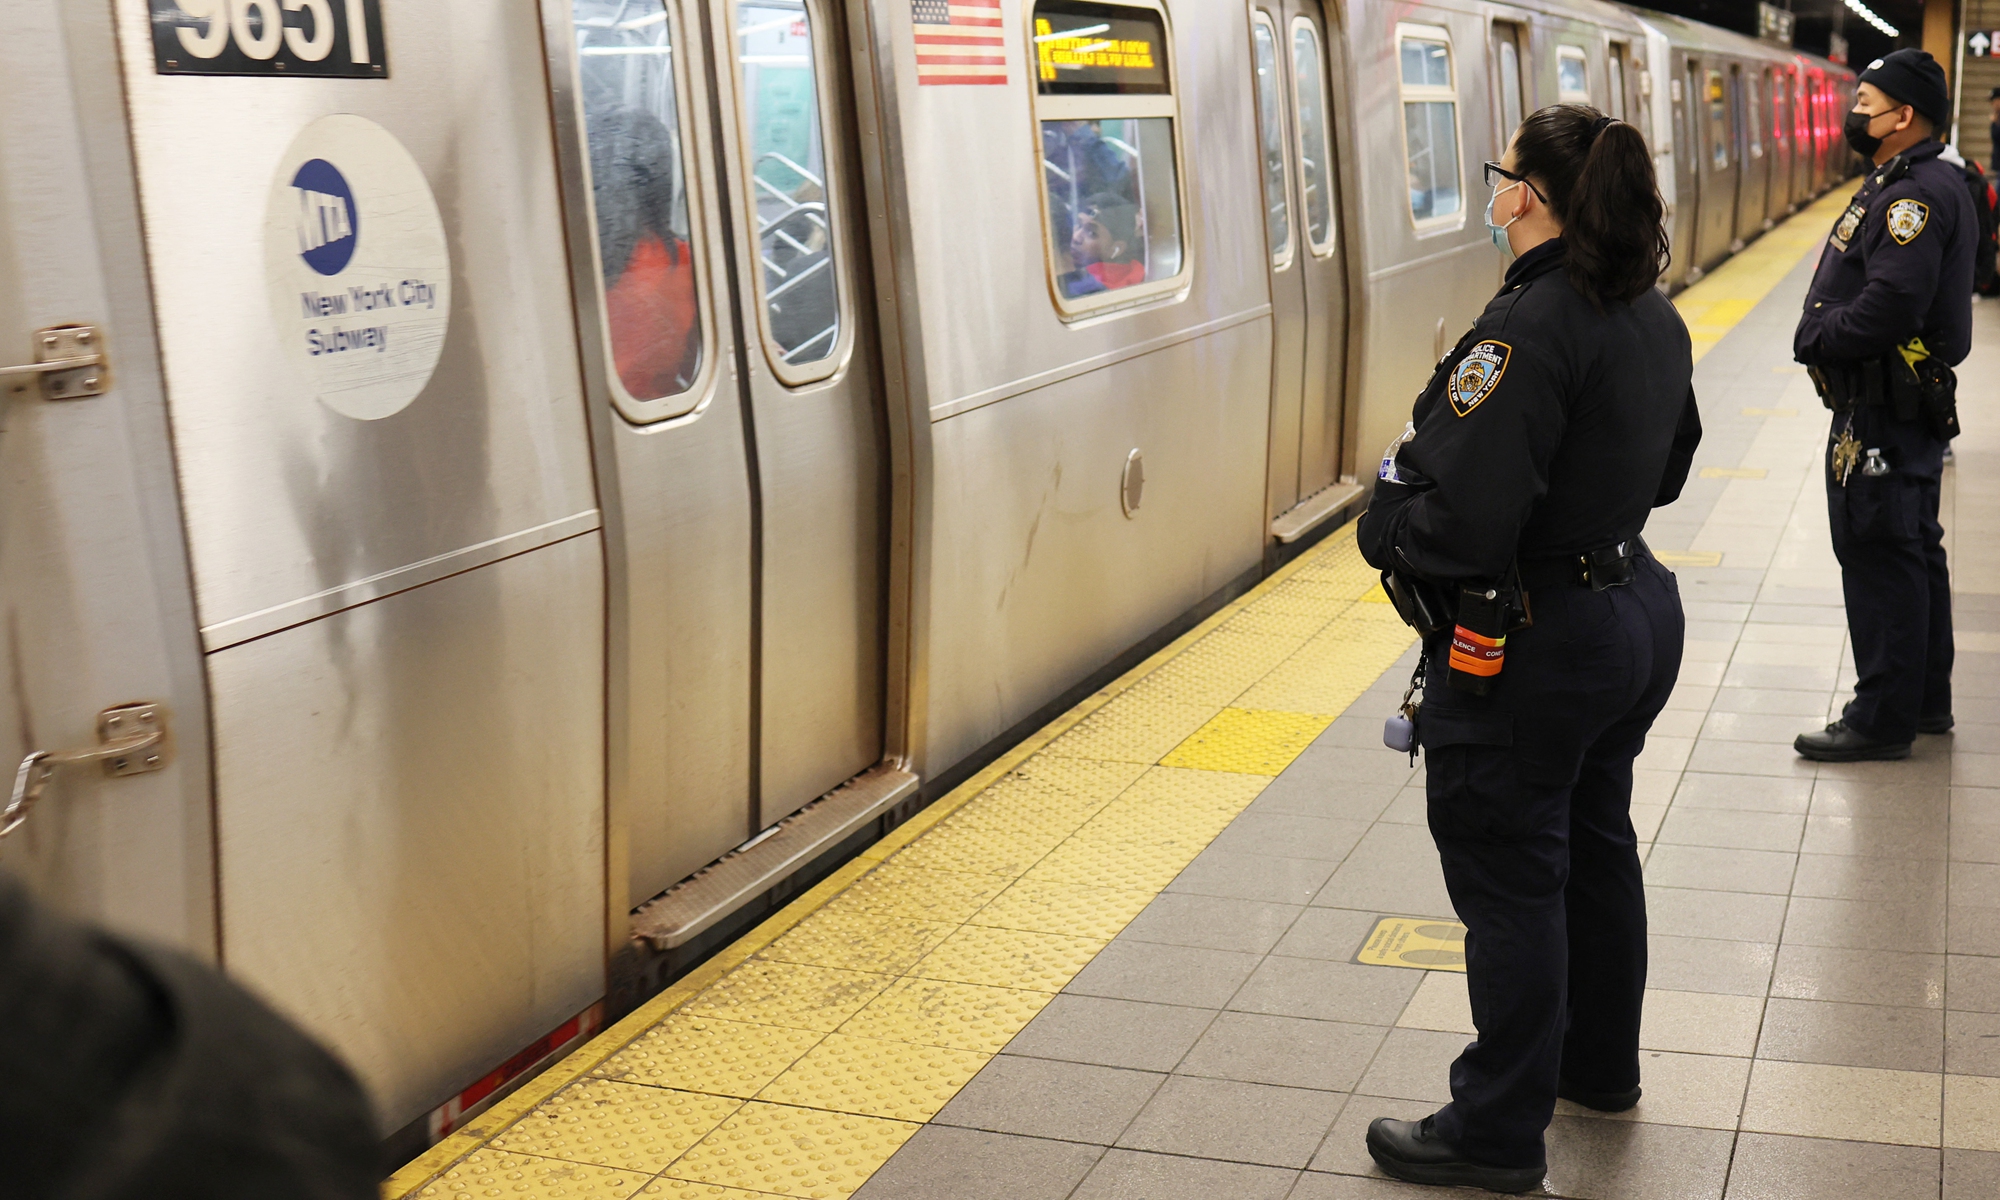 NYPD officers patrol the subway platform at the 36th Street subway station on April 13, 2022 in the Sunset Park neighborhood of Brooklyn, New York City. A manhunt is under way for a gunman who critically injured more than 20 on the train during Tuesday's morning rush hour. Photo: AFP